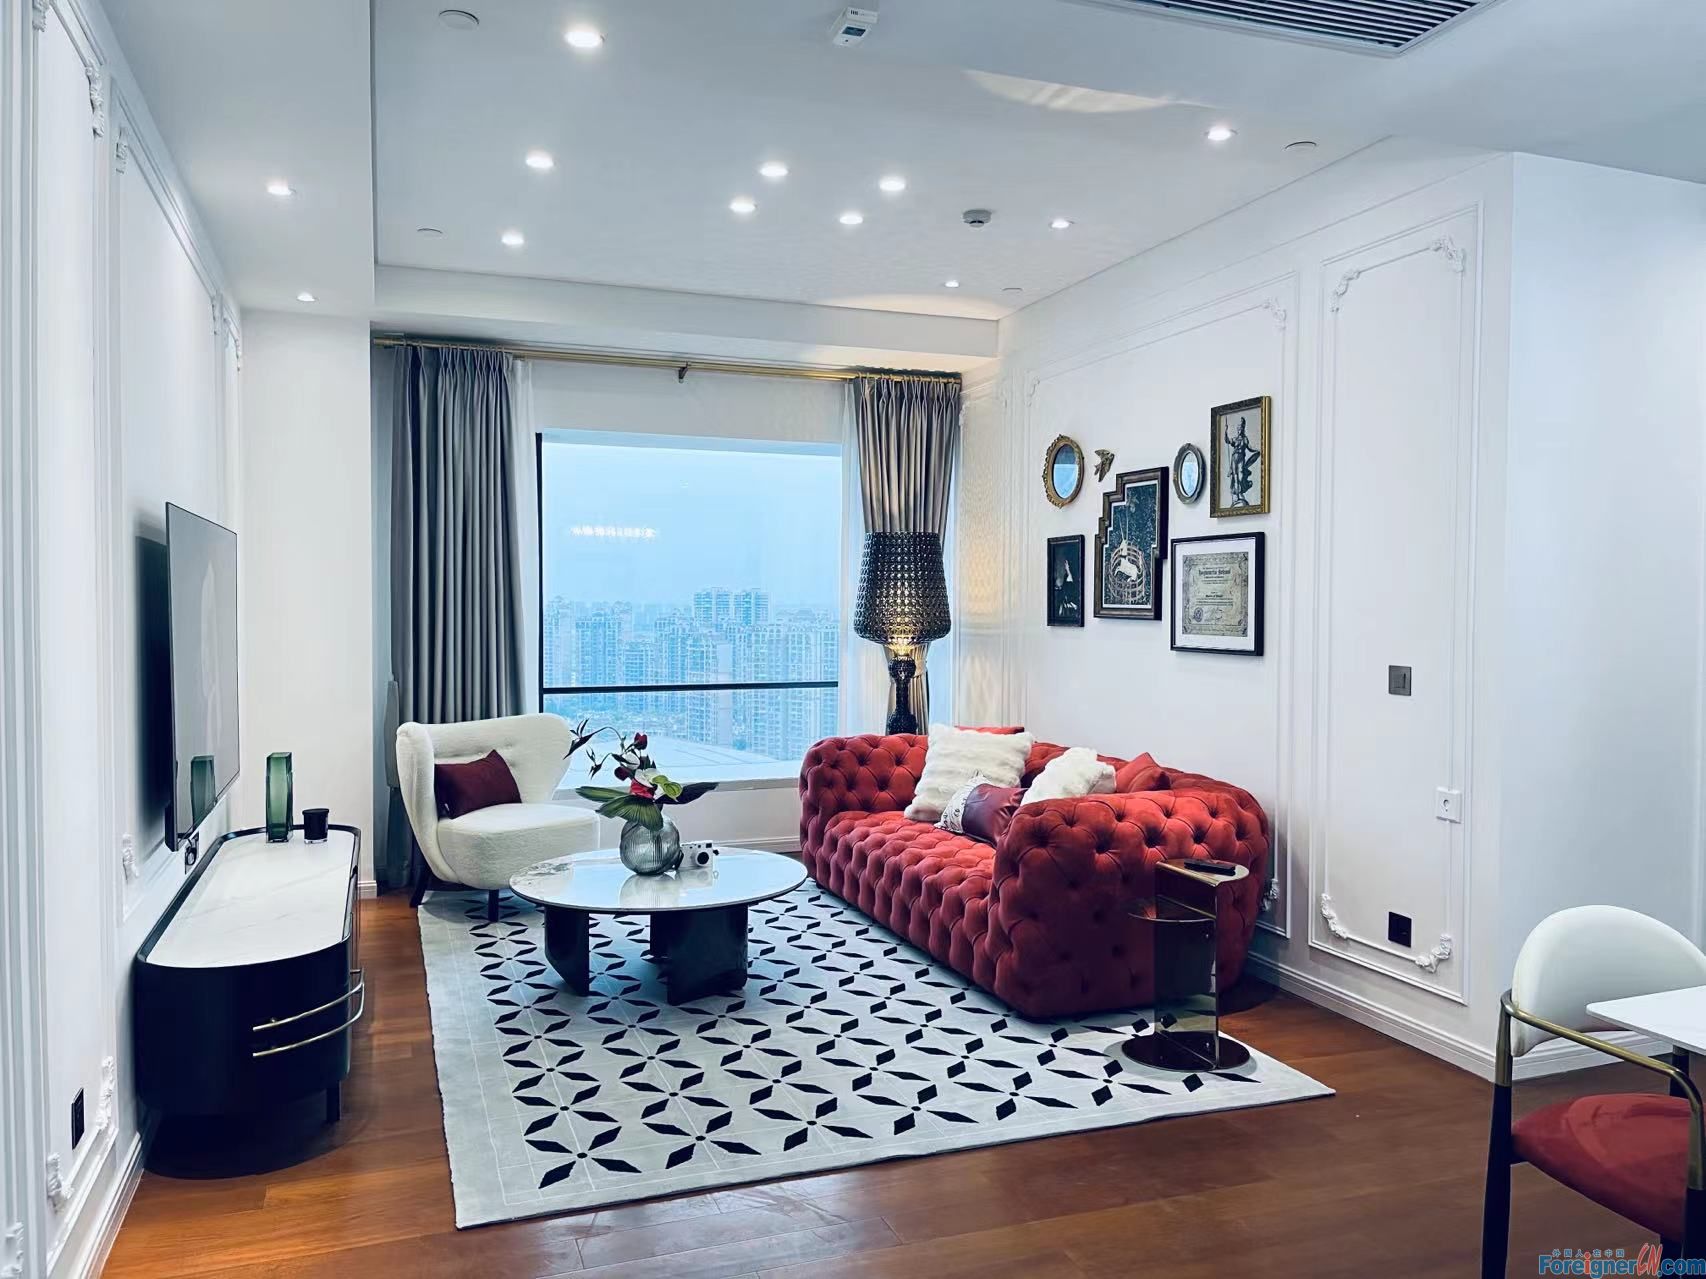 High Floor!! Eslite Residence apartment to rent in SIP/ Floor heating and central AC/lots of light room/Nearby Jinji Lake and Moon habor,Time Square,Subway line 1